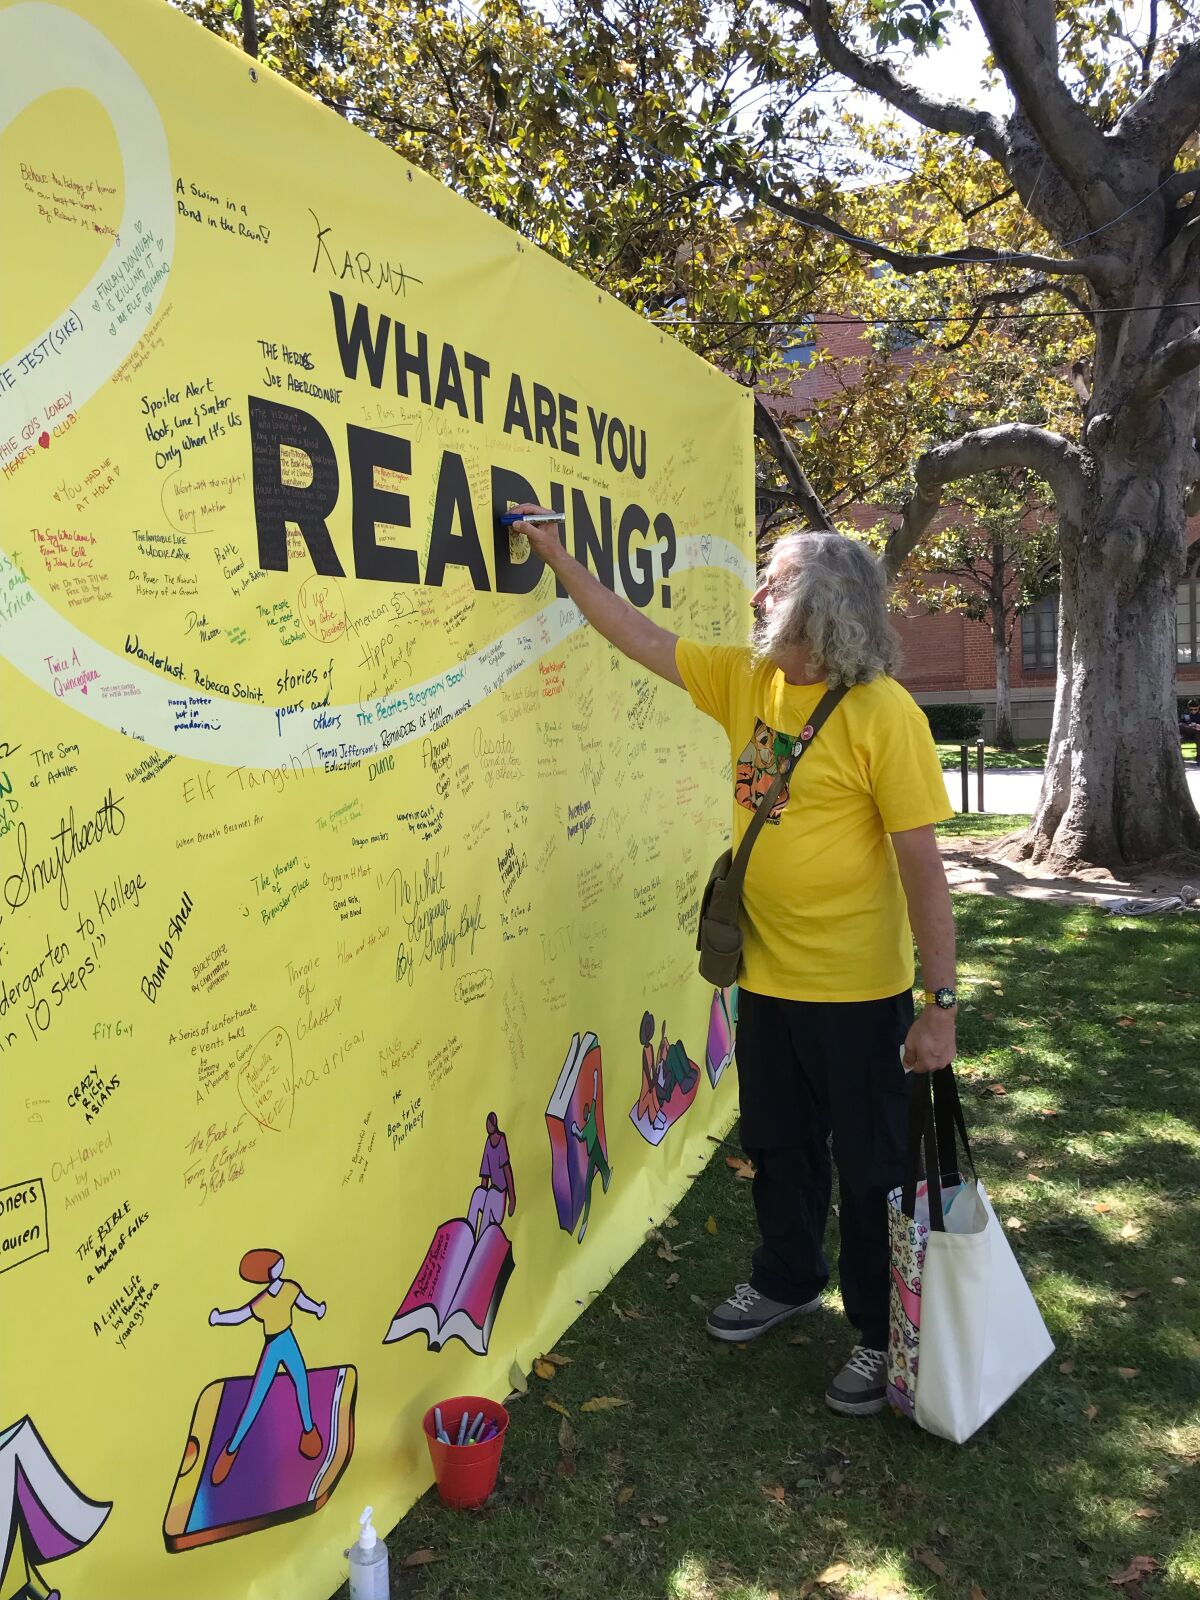 A man signs the "What are you reading?" banner at the Festival of Books.